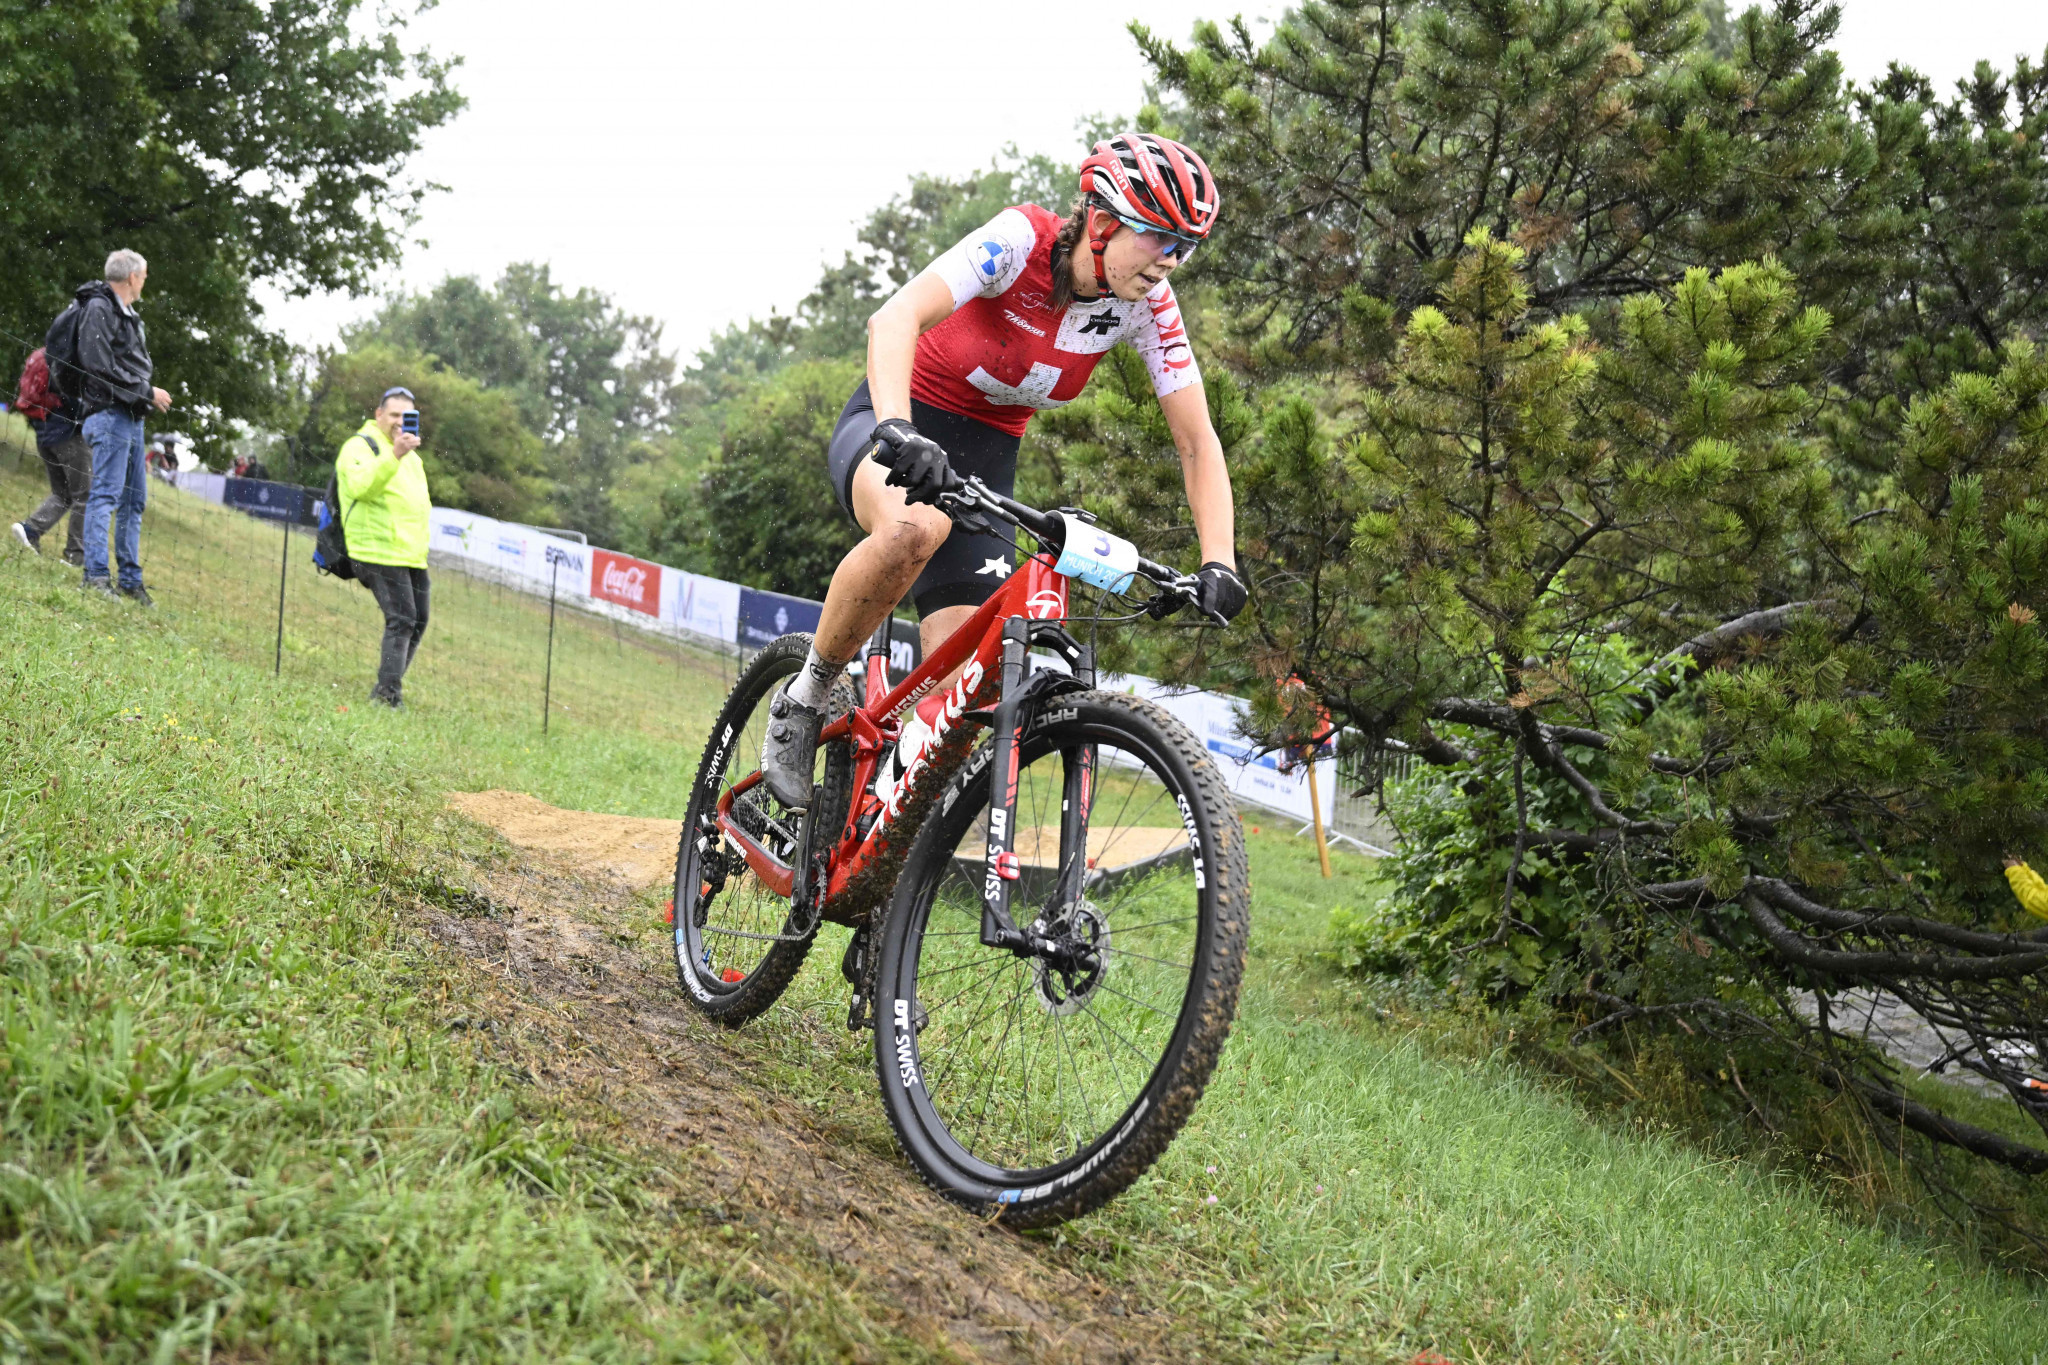 Switzerland's Alessandra Keller won the overall women's cross-country short track UCI Mountain Bike World Cup title ©Getty Images